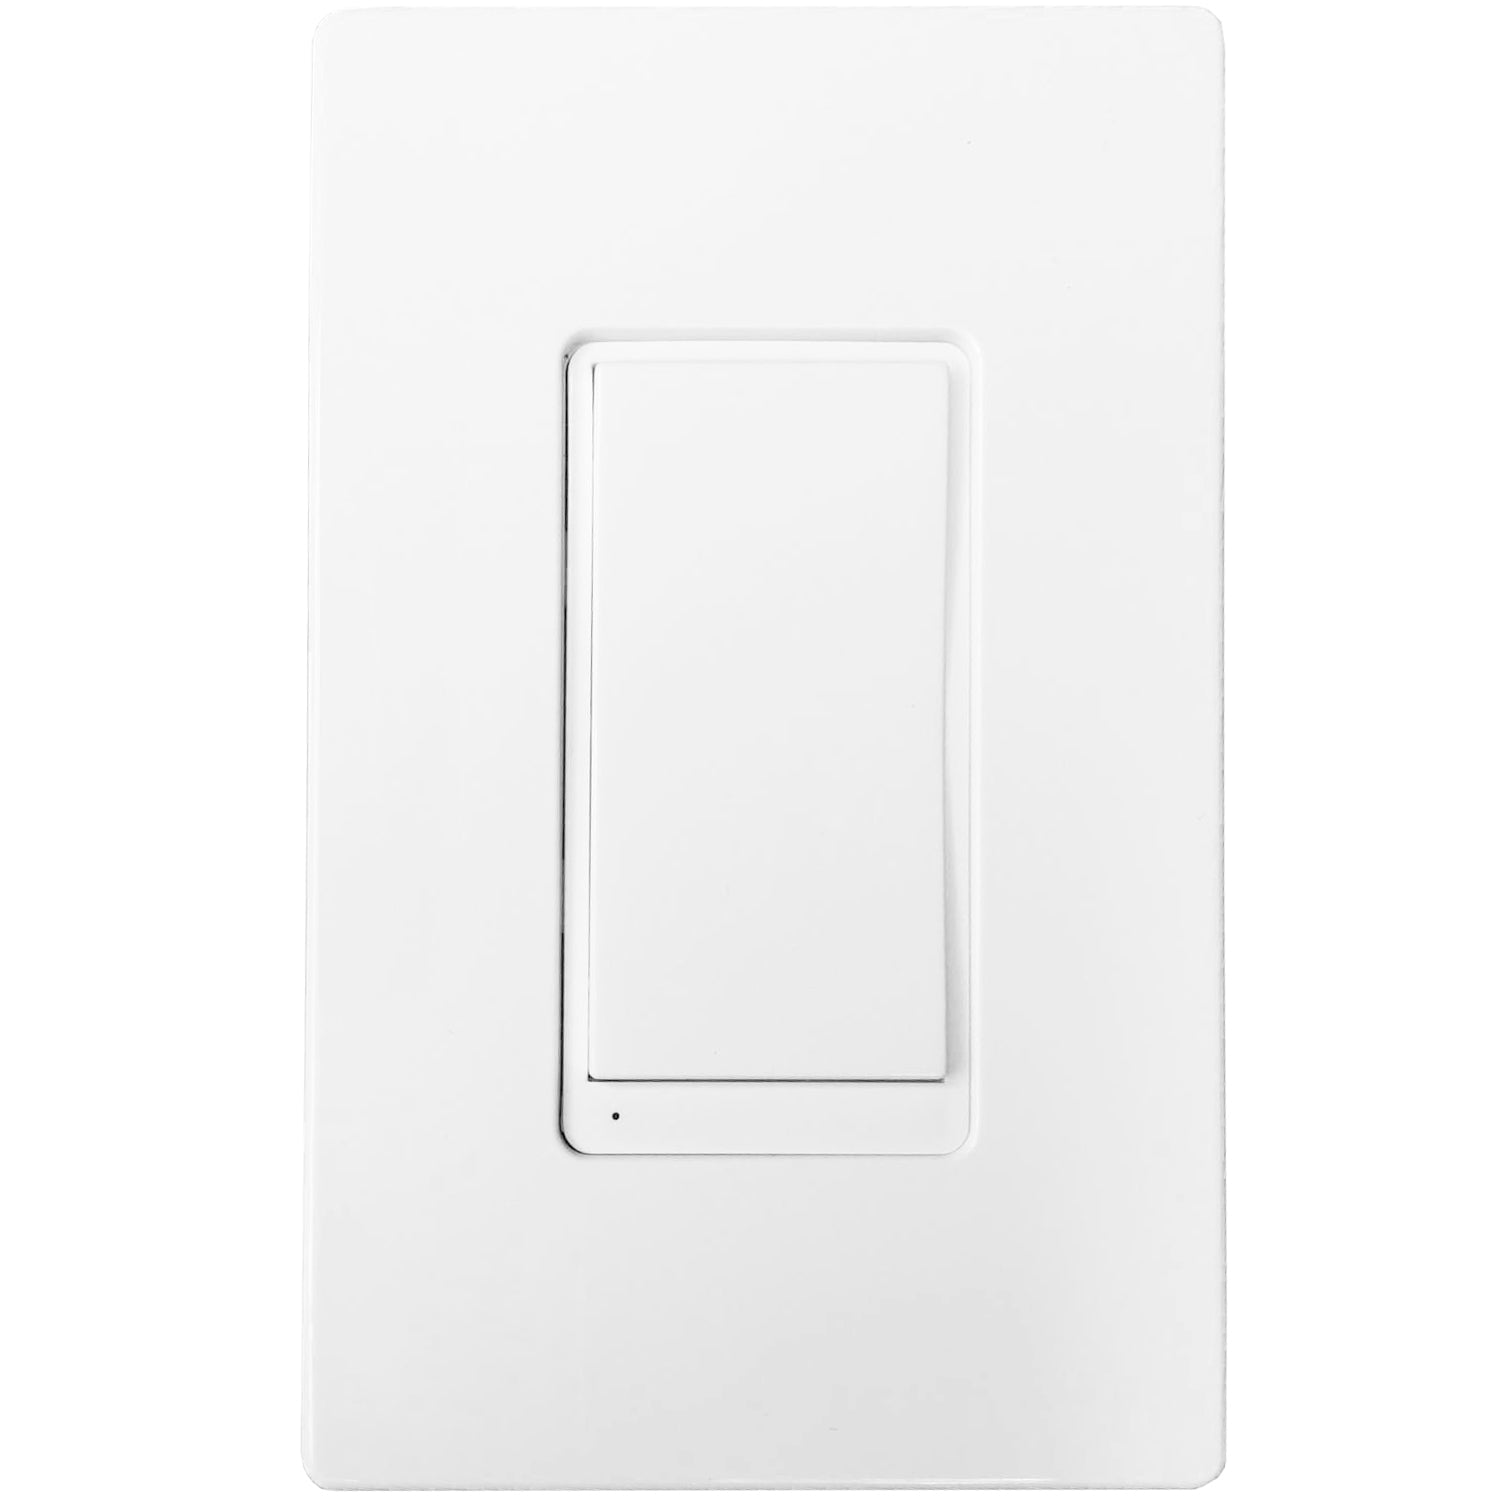 Ancona Smart Wi-Fi ON/OFF Switch for Towel Warmers and Lighting